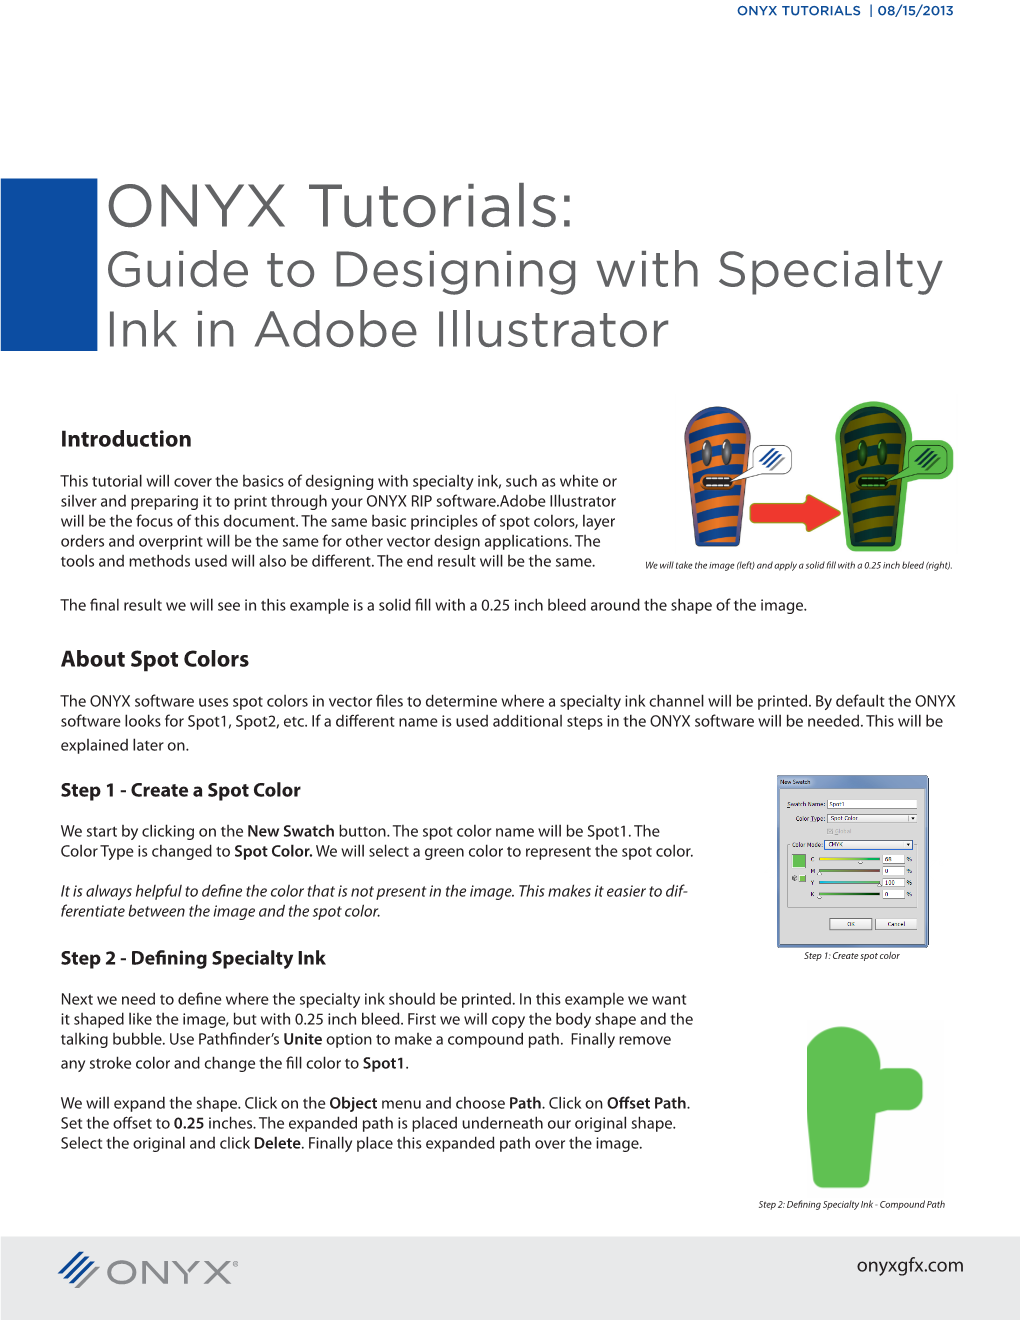 ONYX Tutorials: Guide to Designing with Specialty Ink in Adobe Illustrator